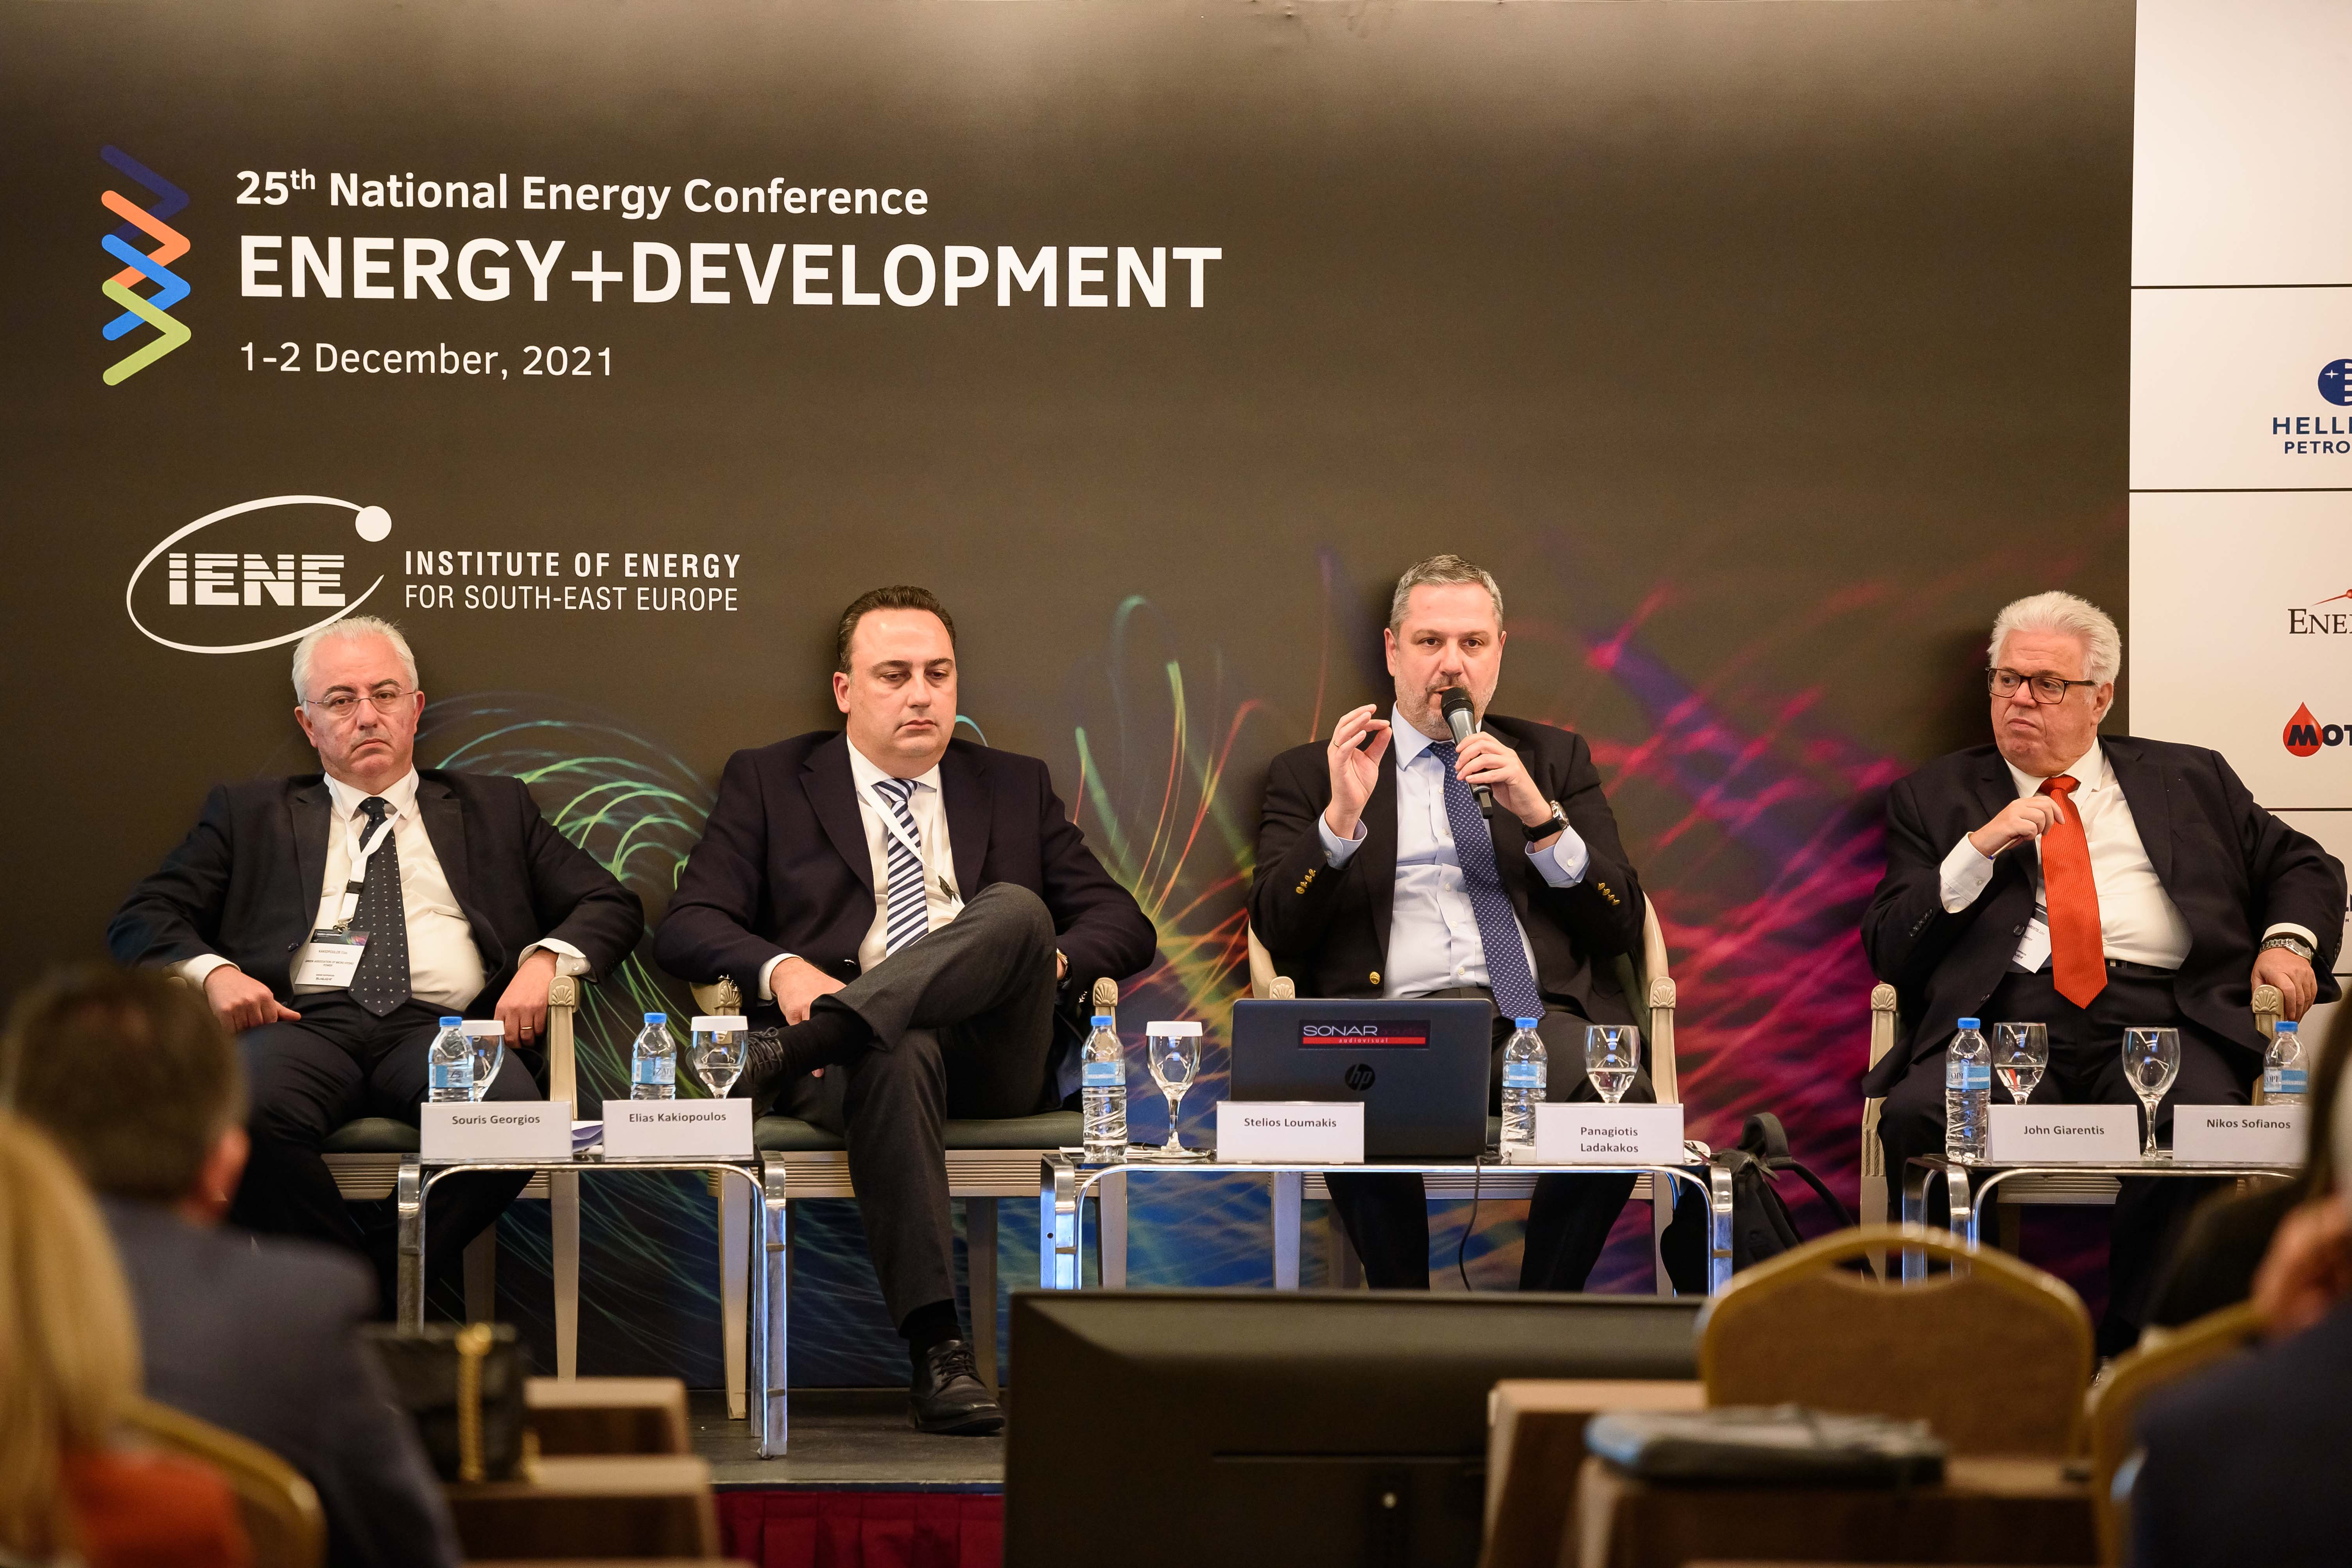 The role of gas and renewables in Energy Transition hotly debated in annual IENE conference